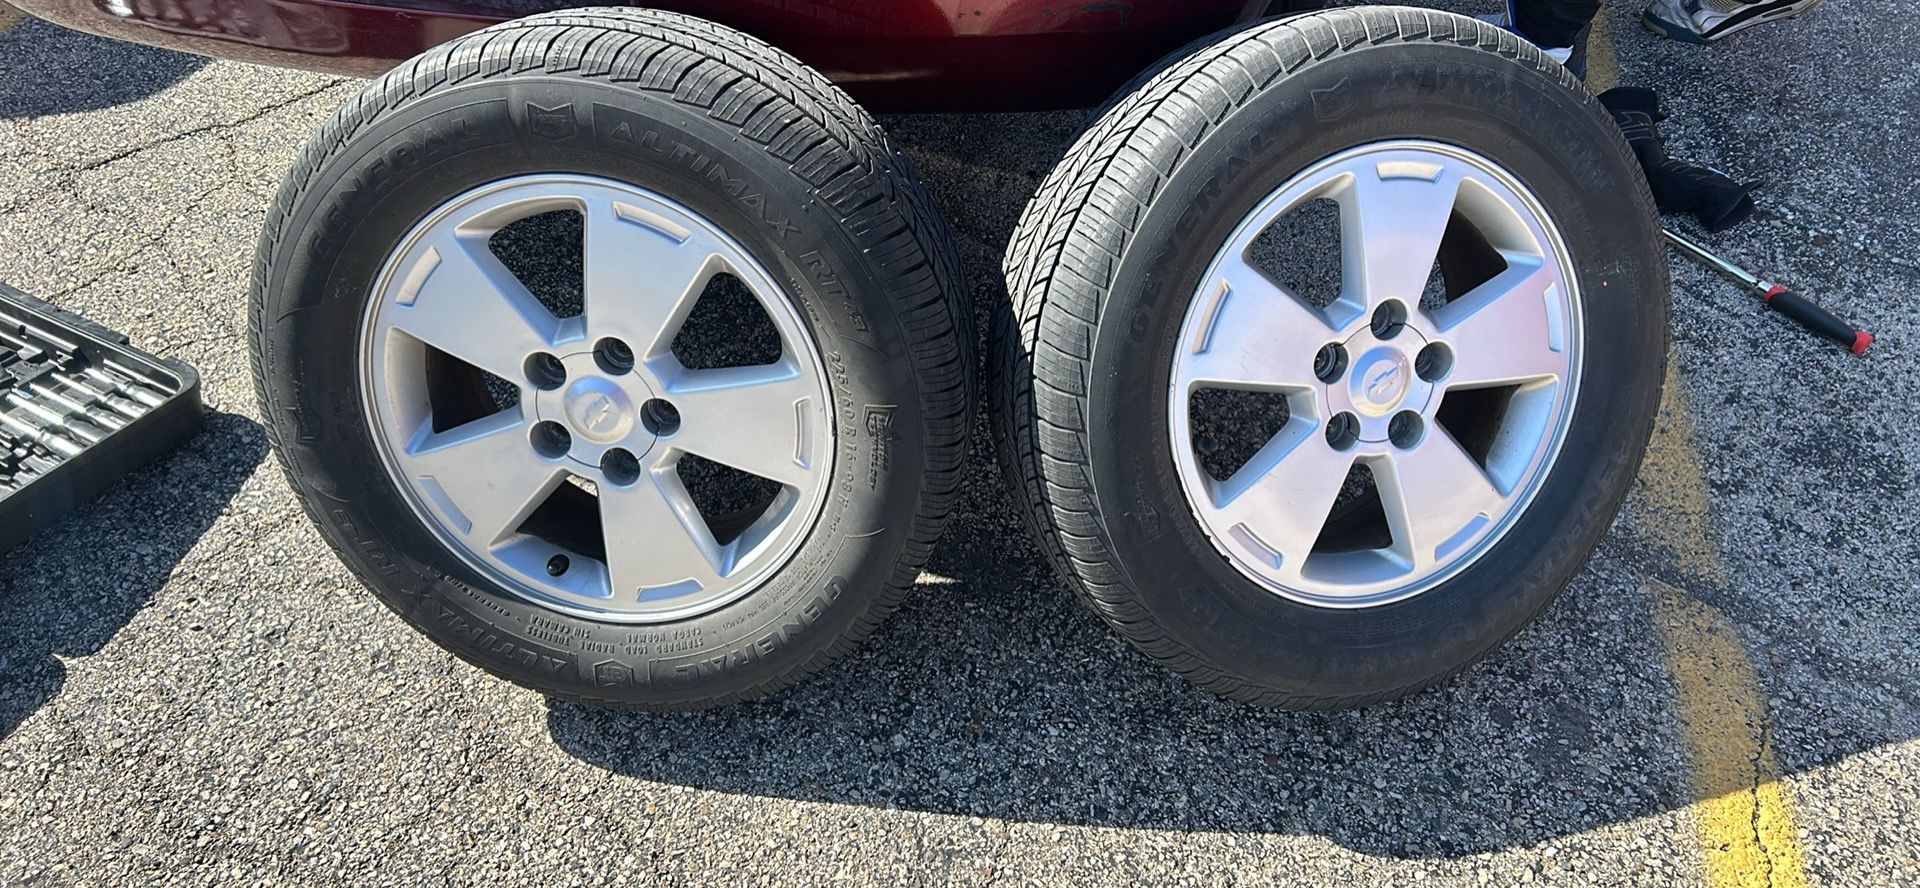 2 used tires,  they are 225/ 60R 16 • 98 H